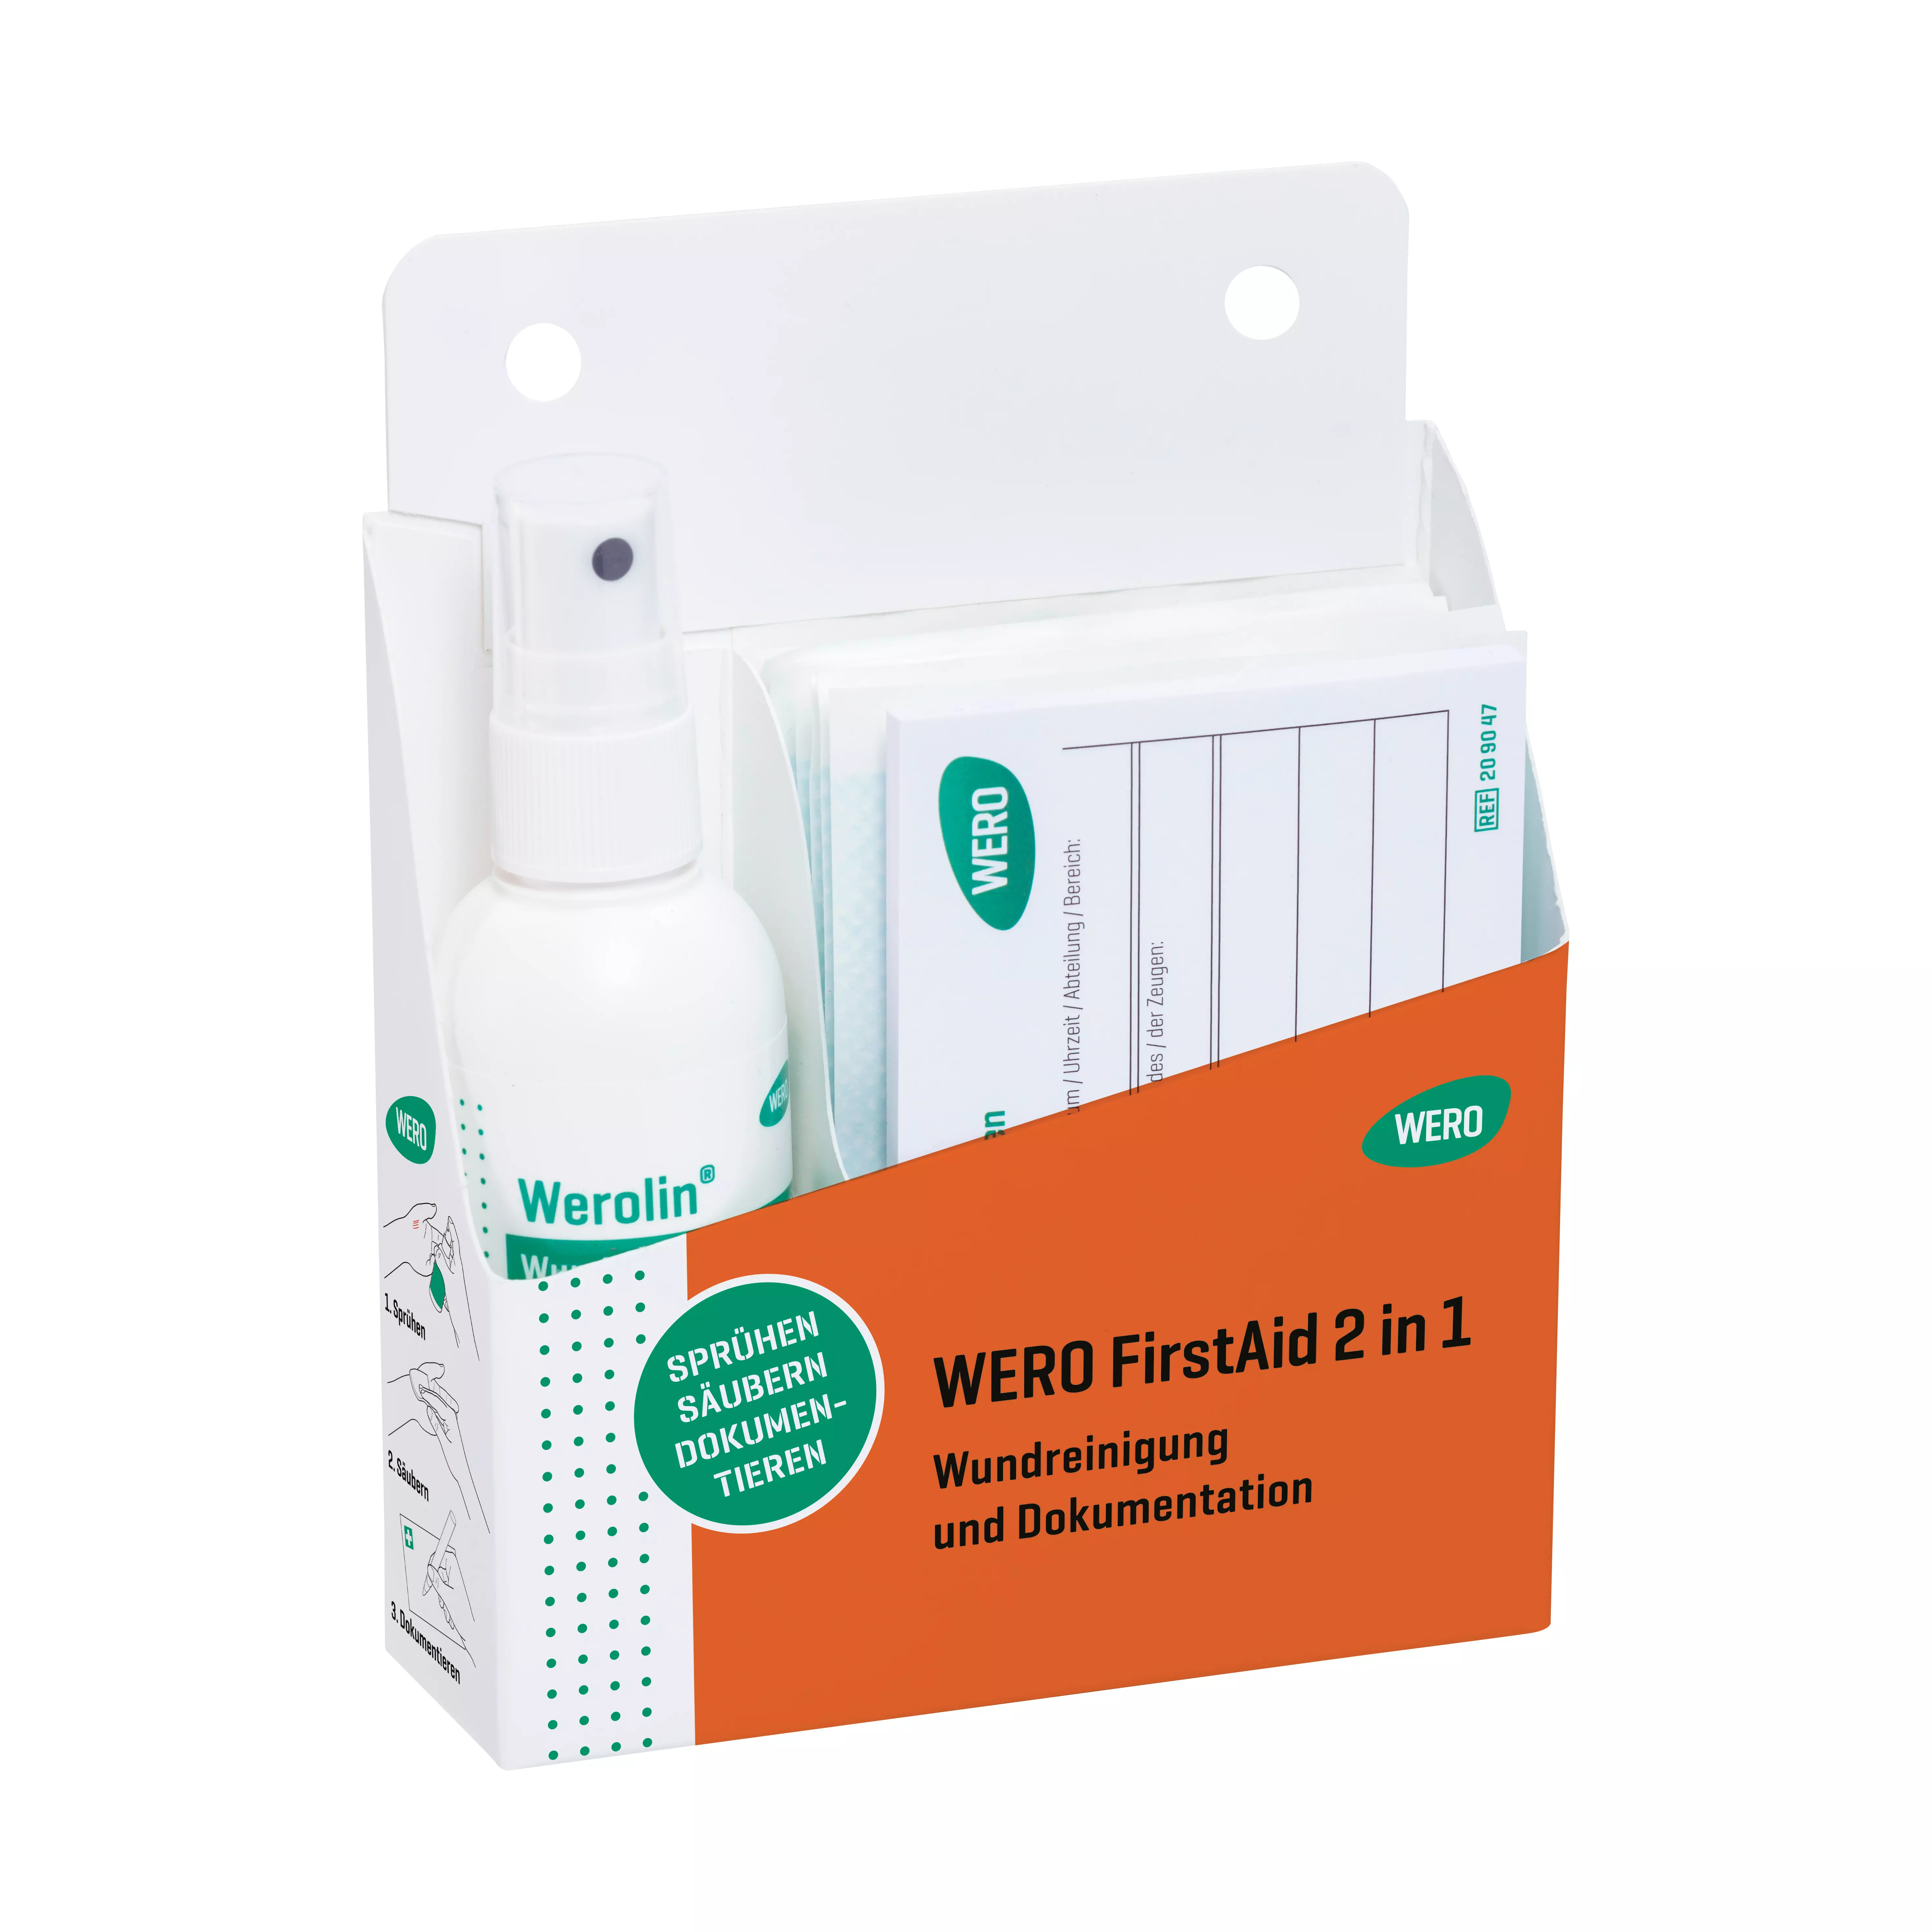 WERO FirstAid 2 in 1 - Wound cleansing and documentation